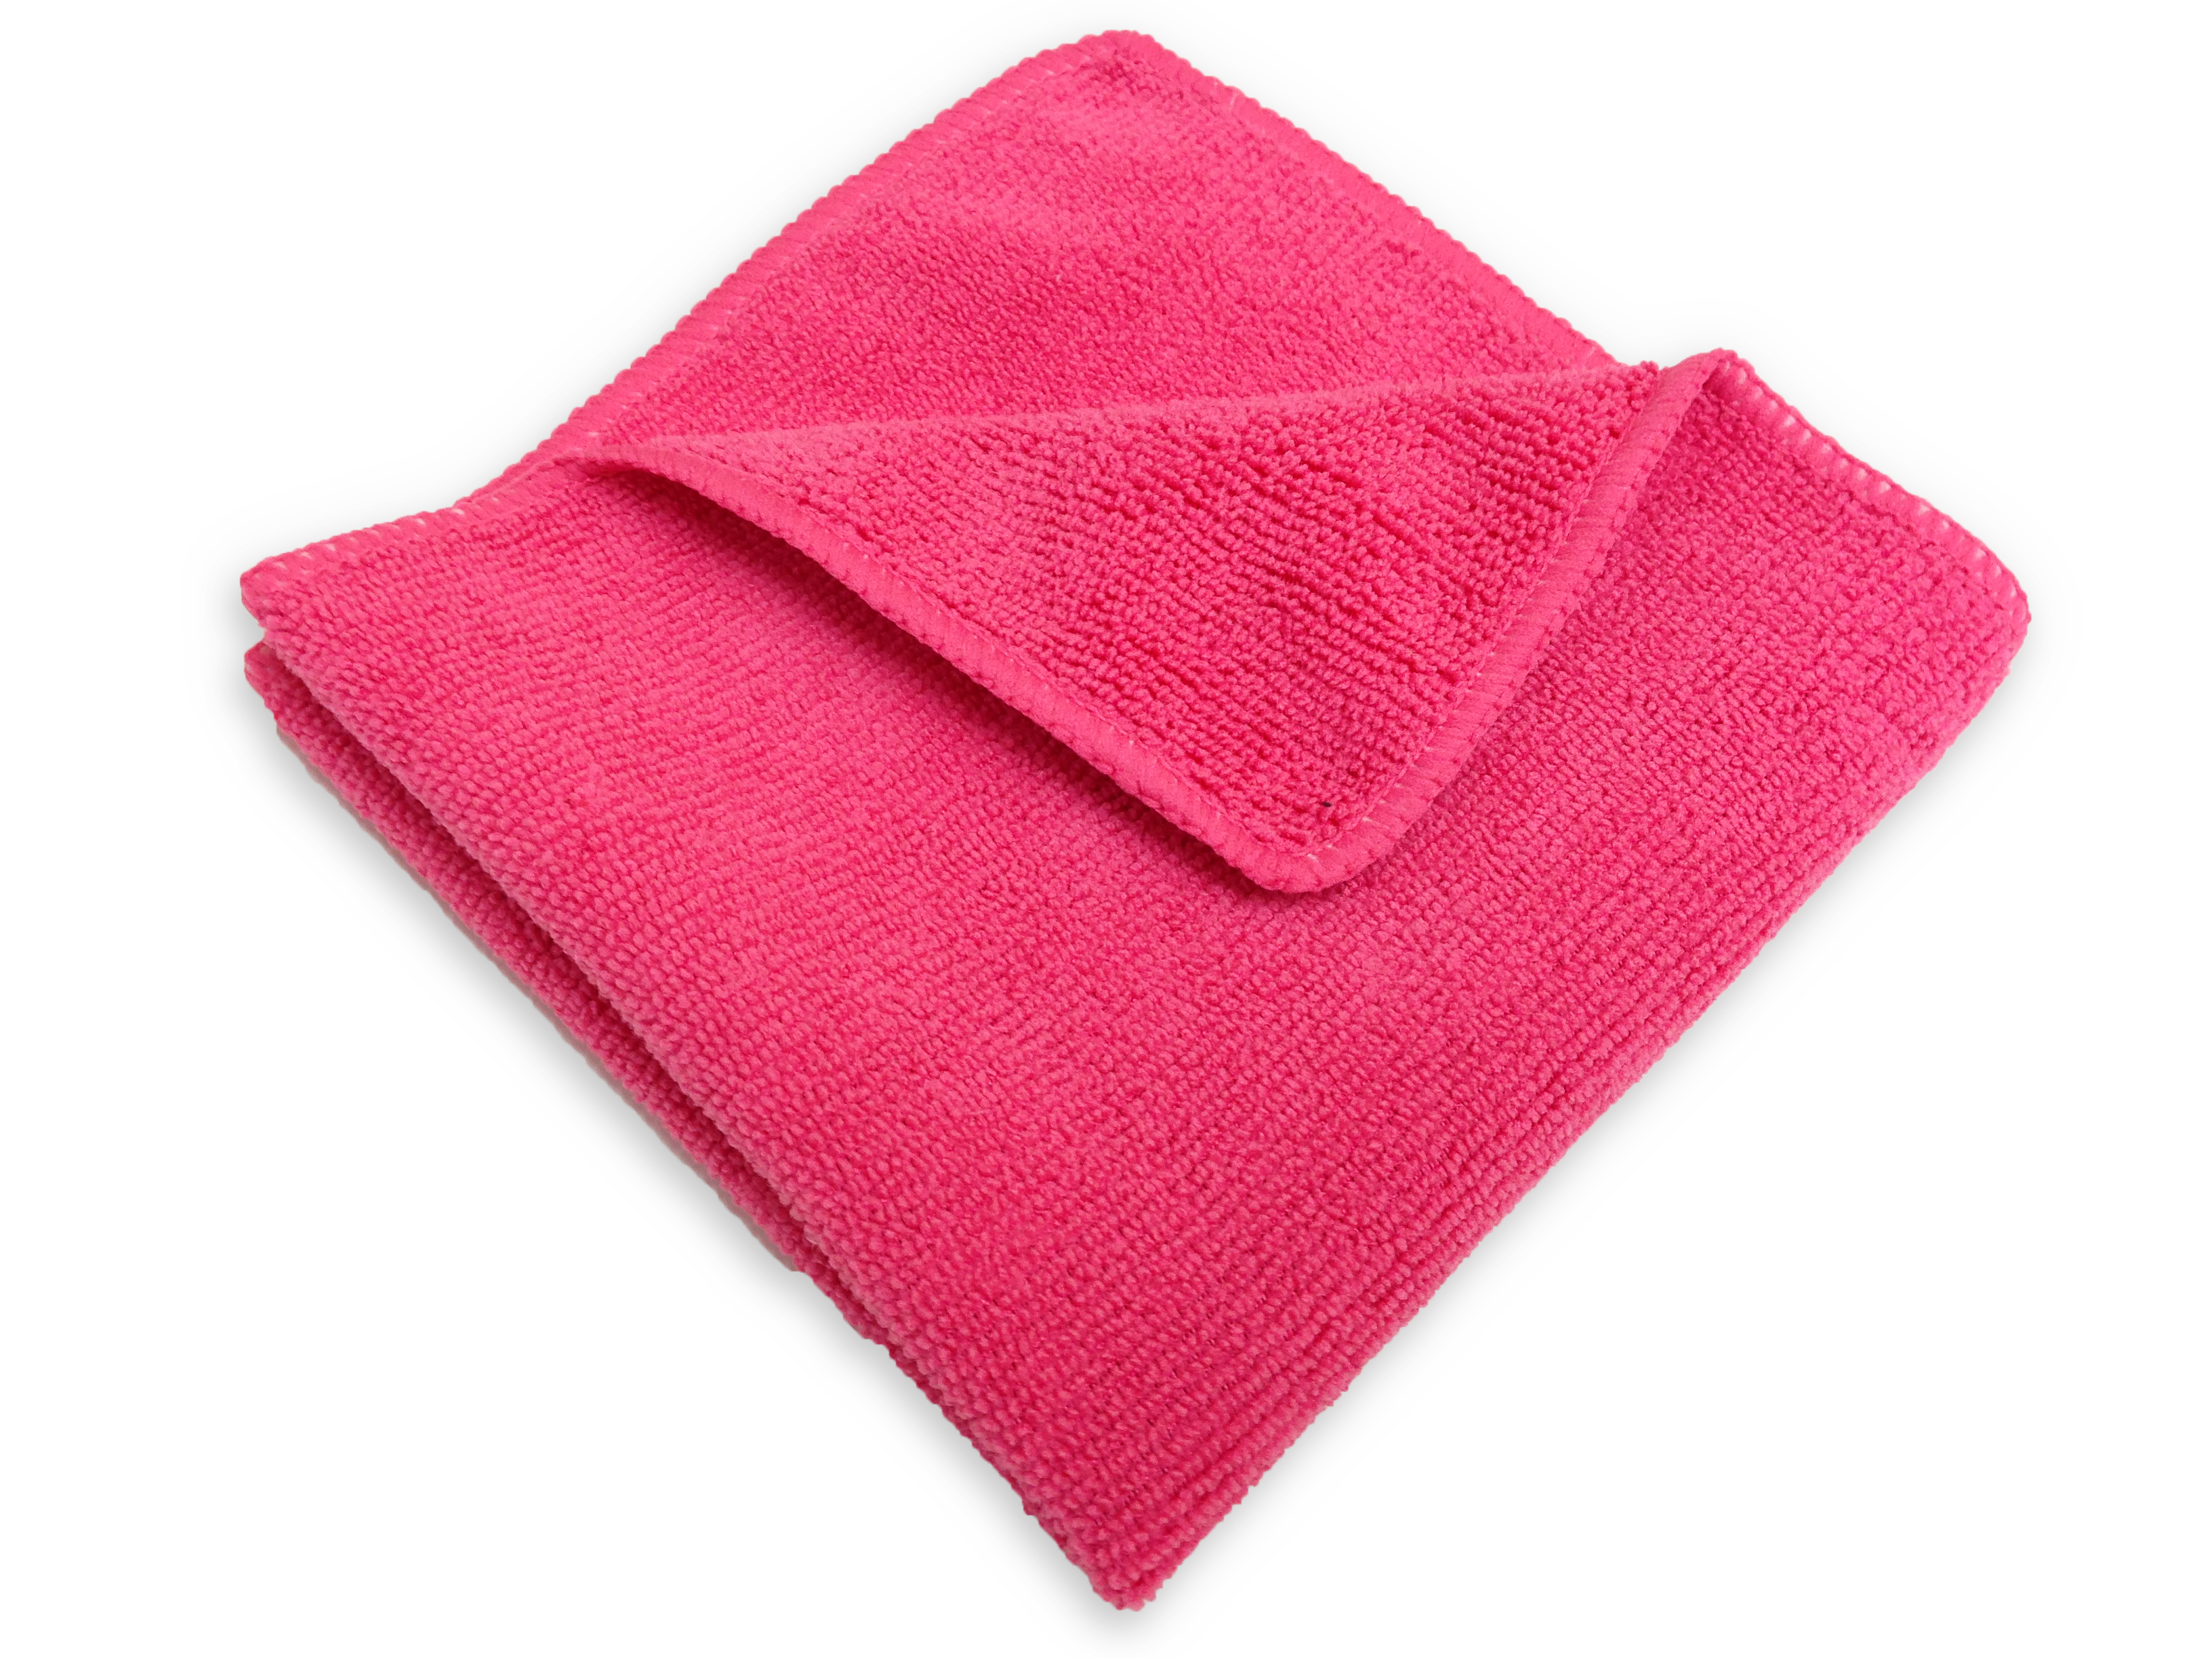 48 Microfiber 14"x14" Cleaning Cloths Detailing Polishing Towels Rags 300GSM